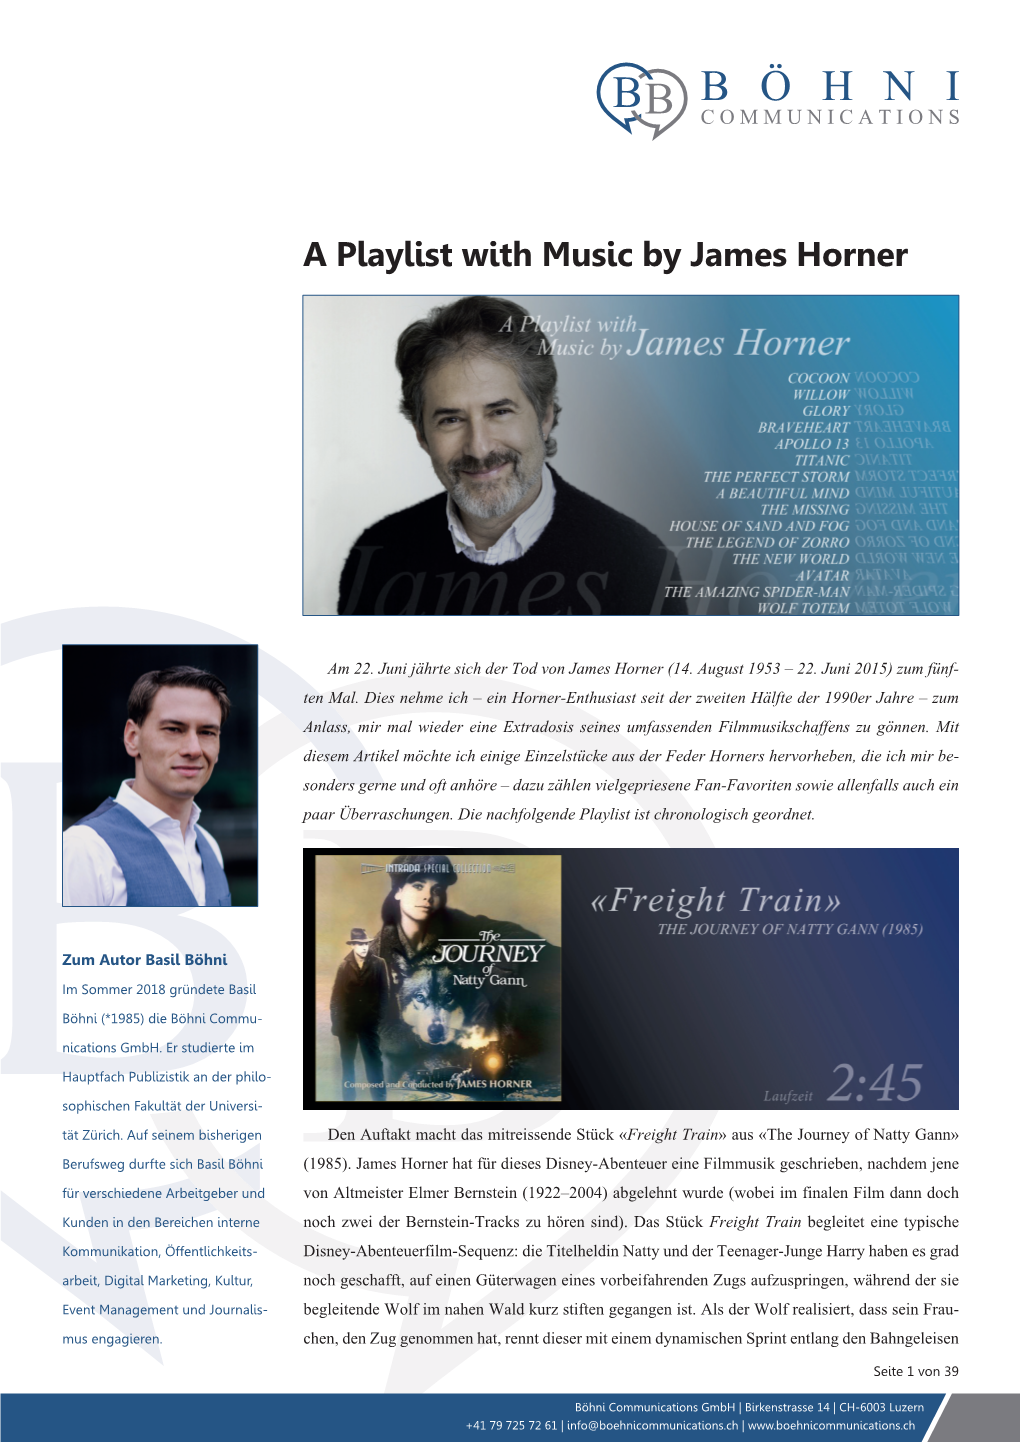 A Playlist with Music by James Horner